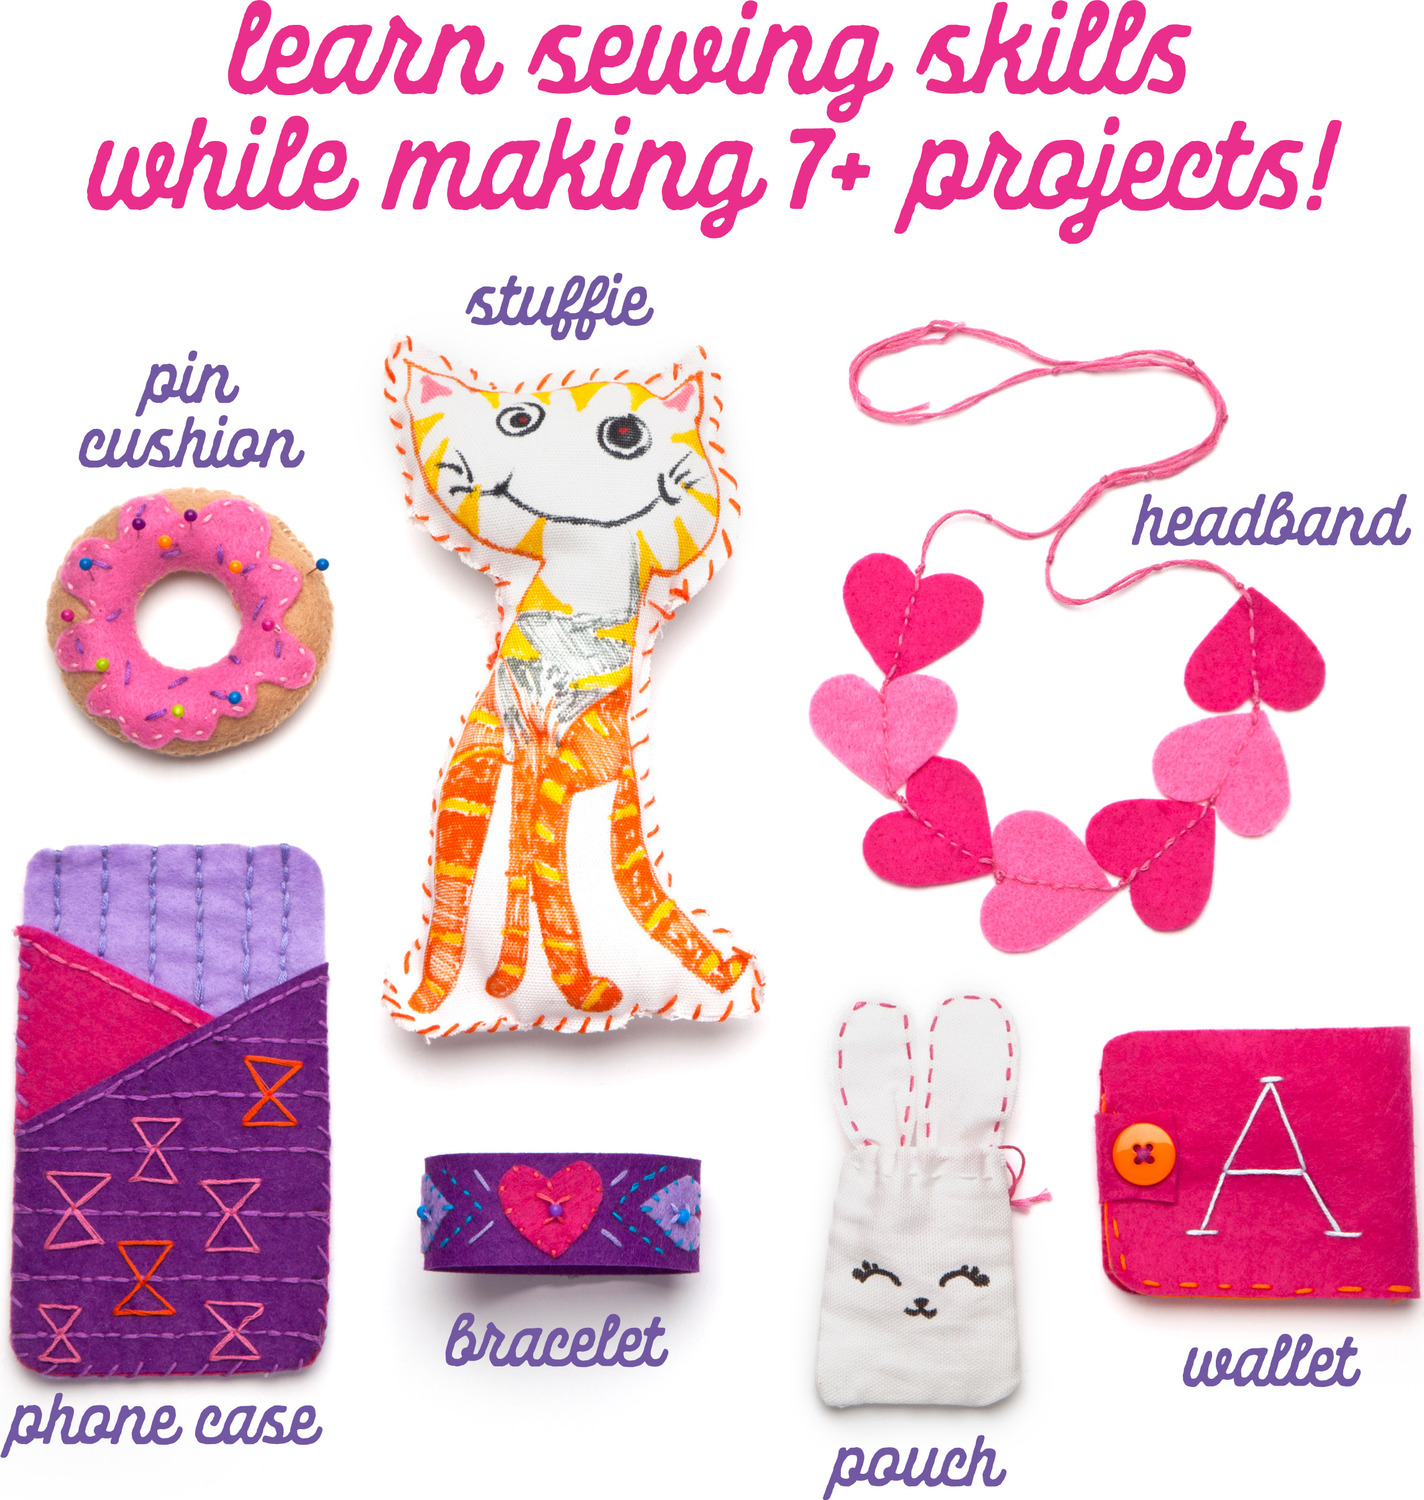 Craft-tastic Learn to Sew Kit - Imagine That Toys